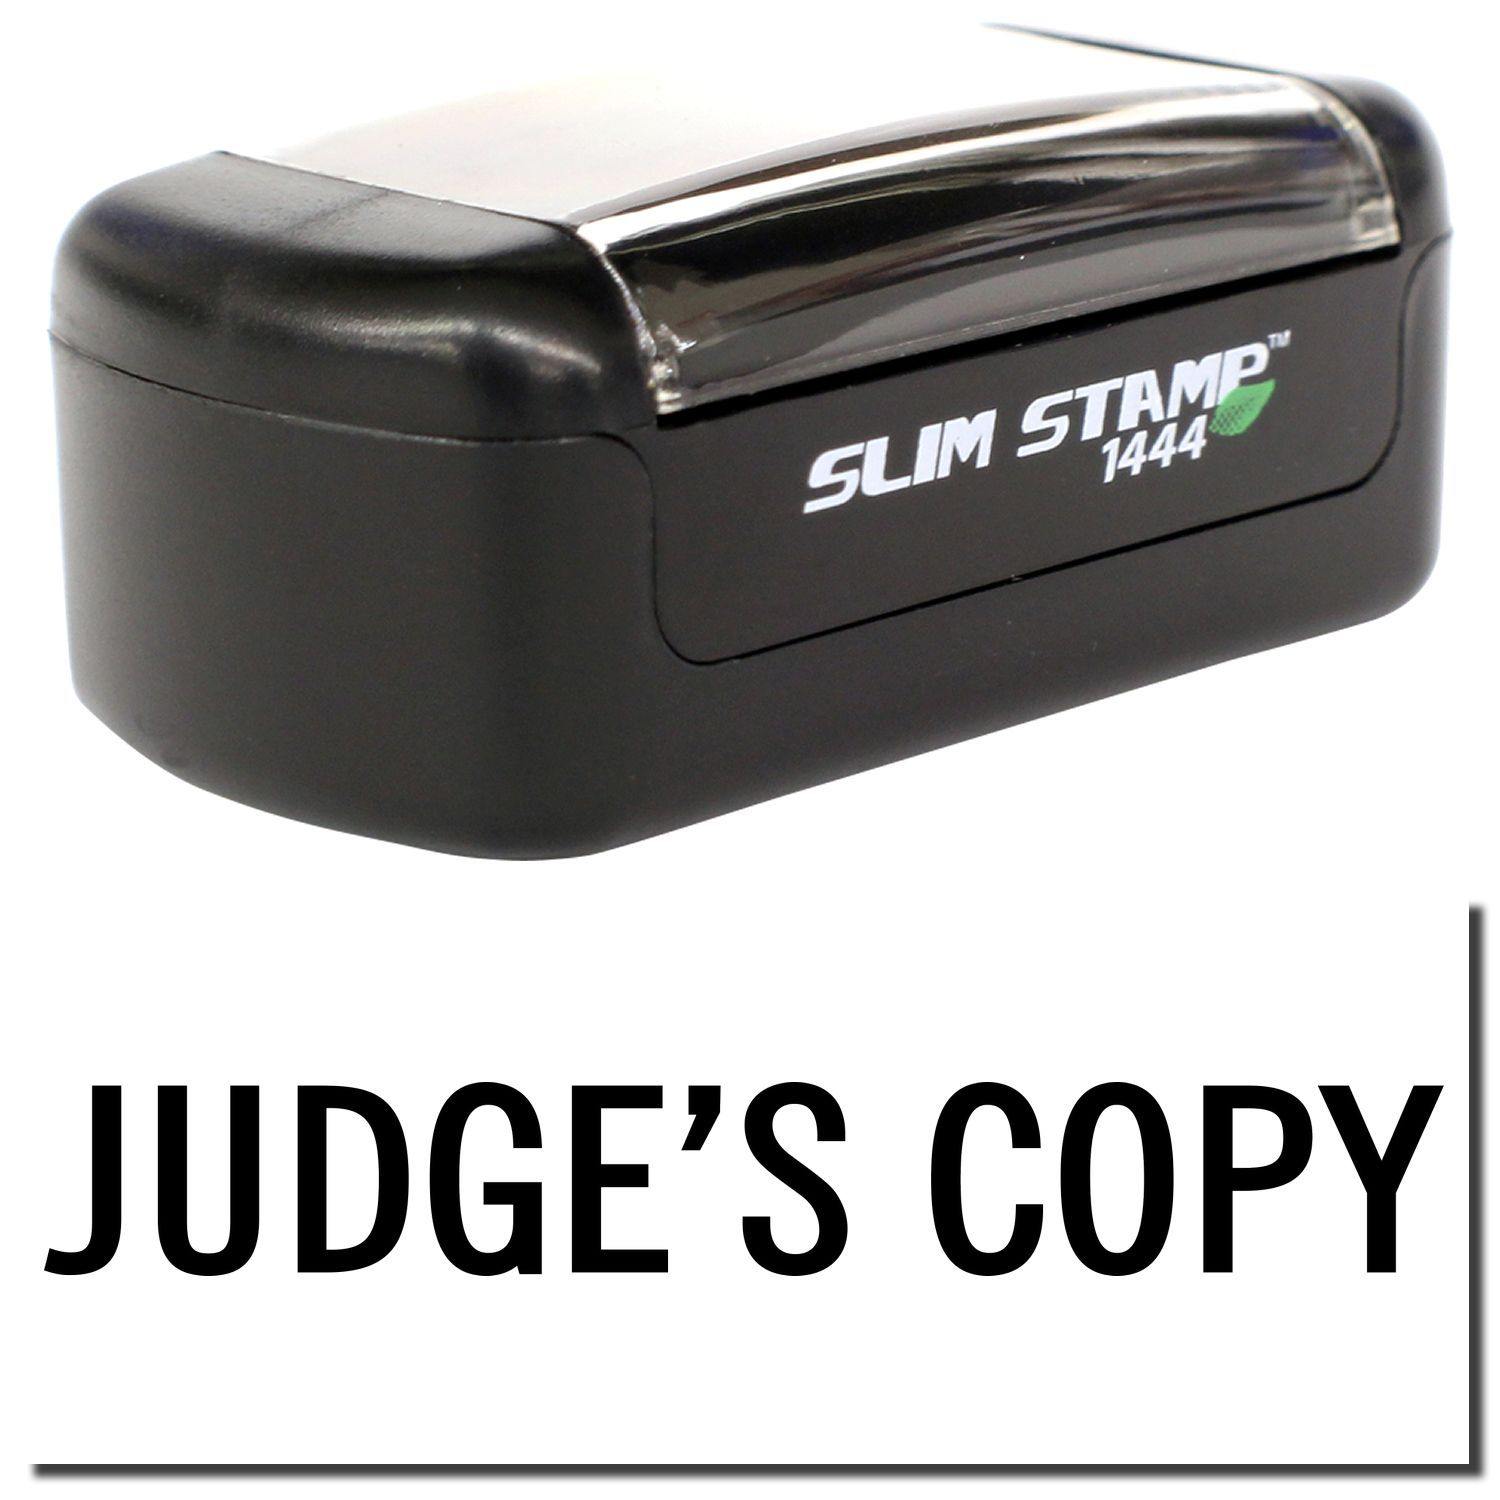 A stock office pre-inked stamp with a stamped image showing how the text "JUDGE'S COPY" is displayed after stamping.